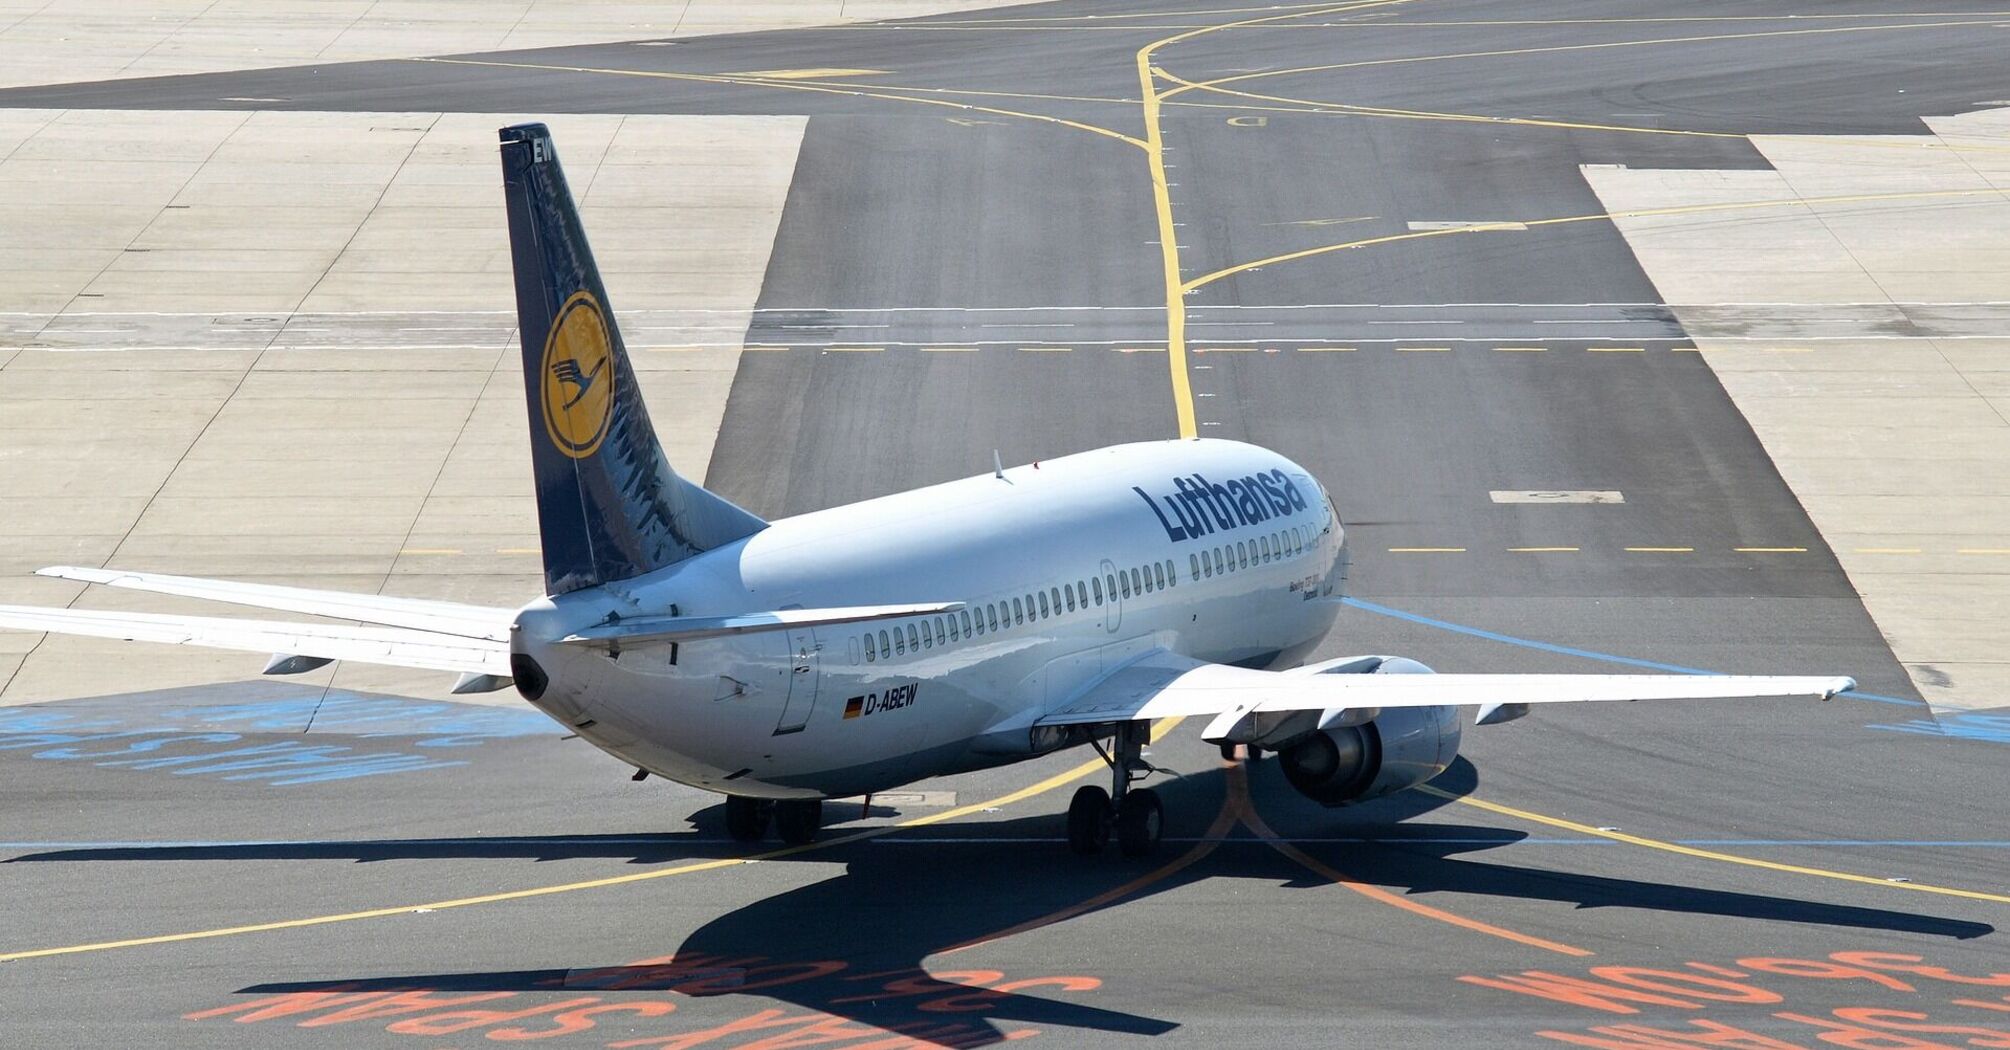 Lufthansa airplane on the tarmac at an airport